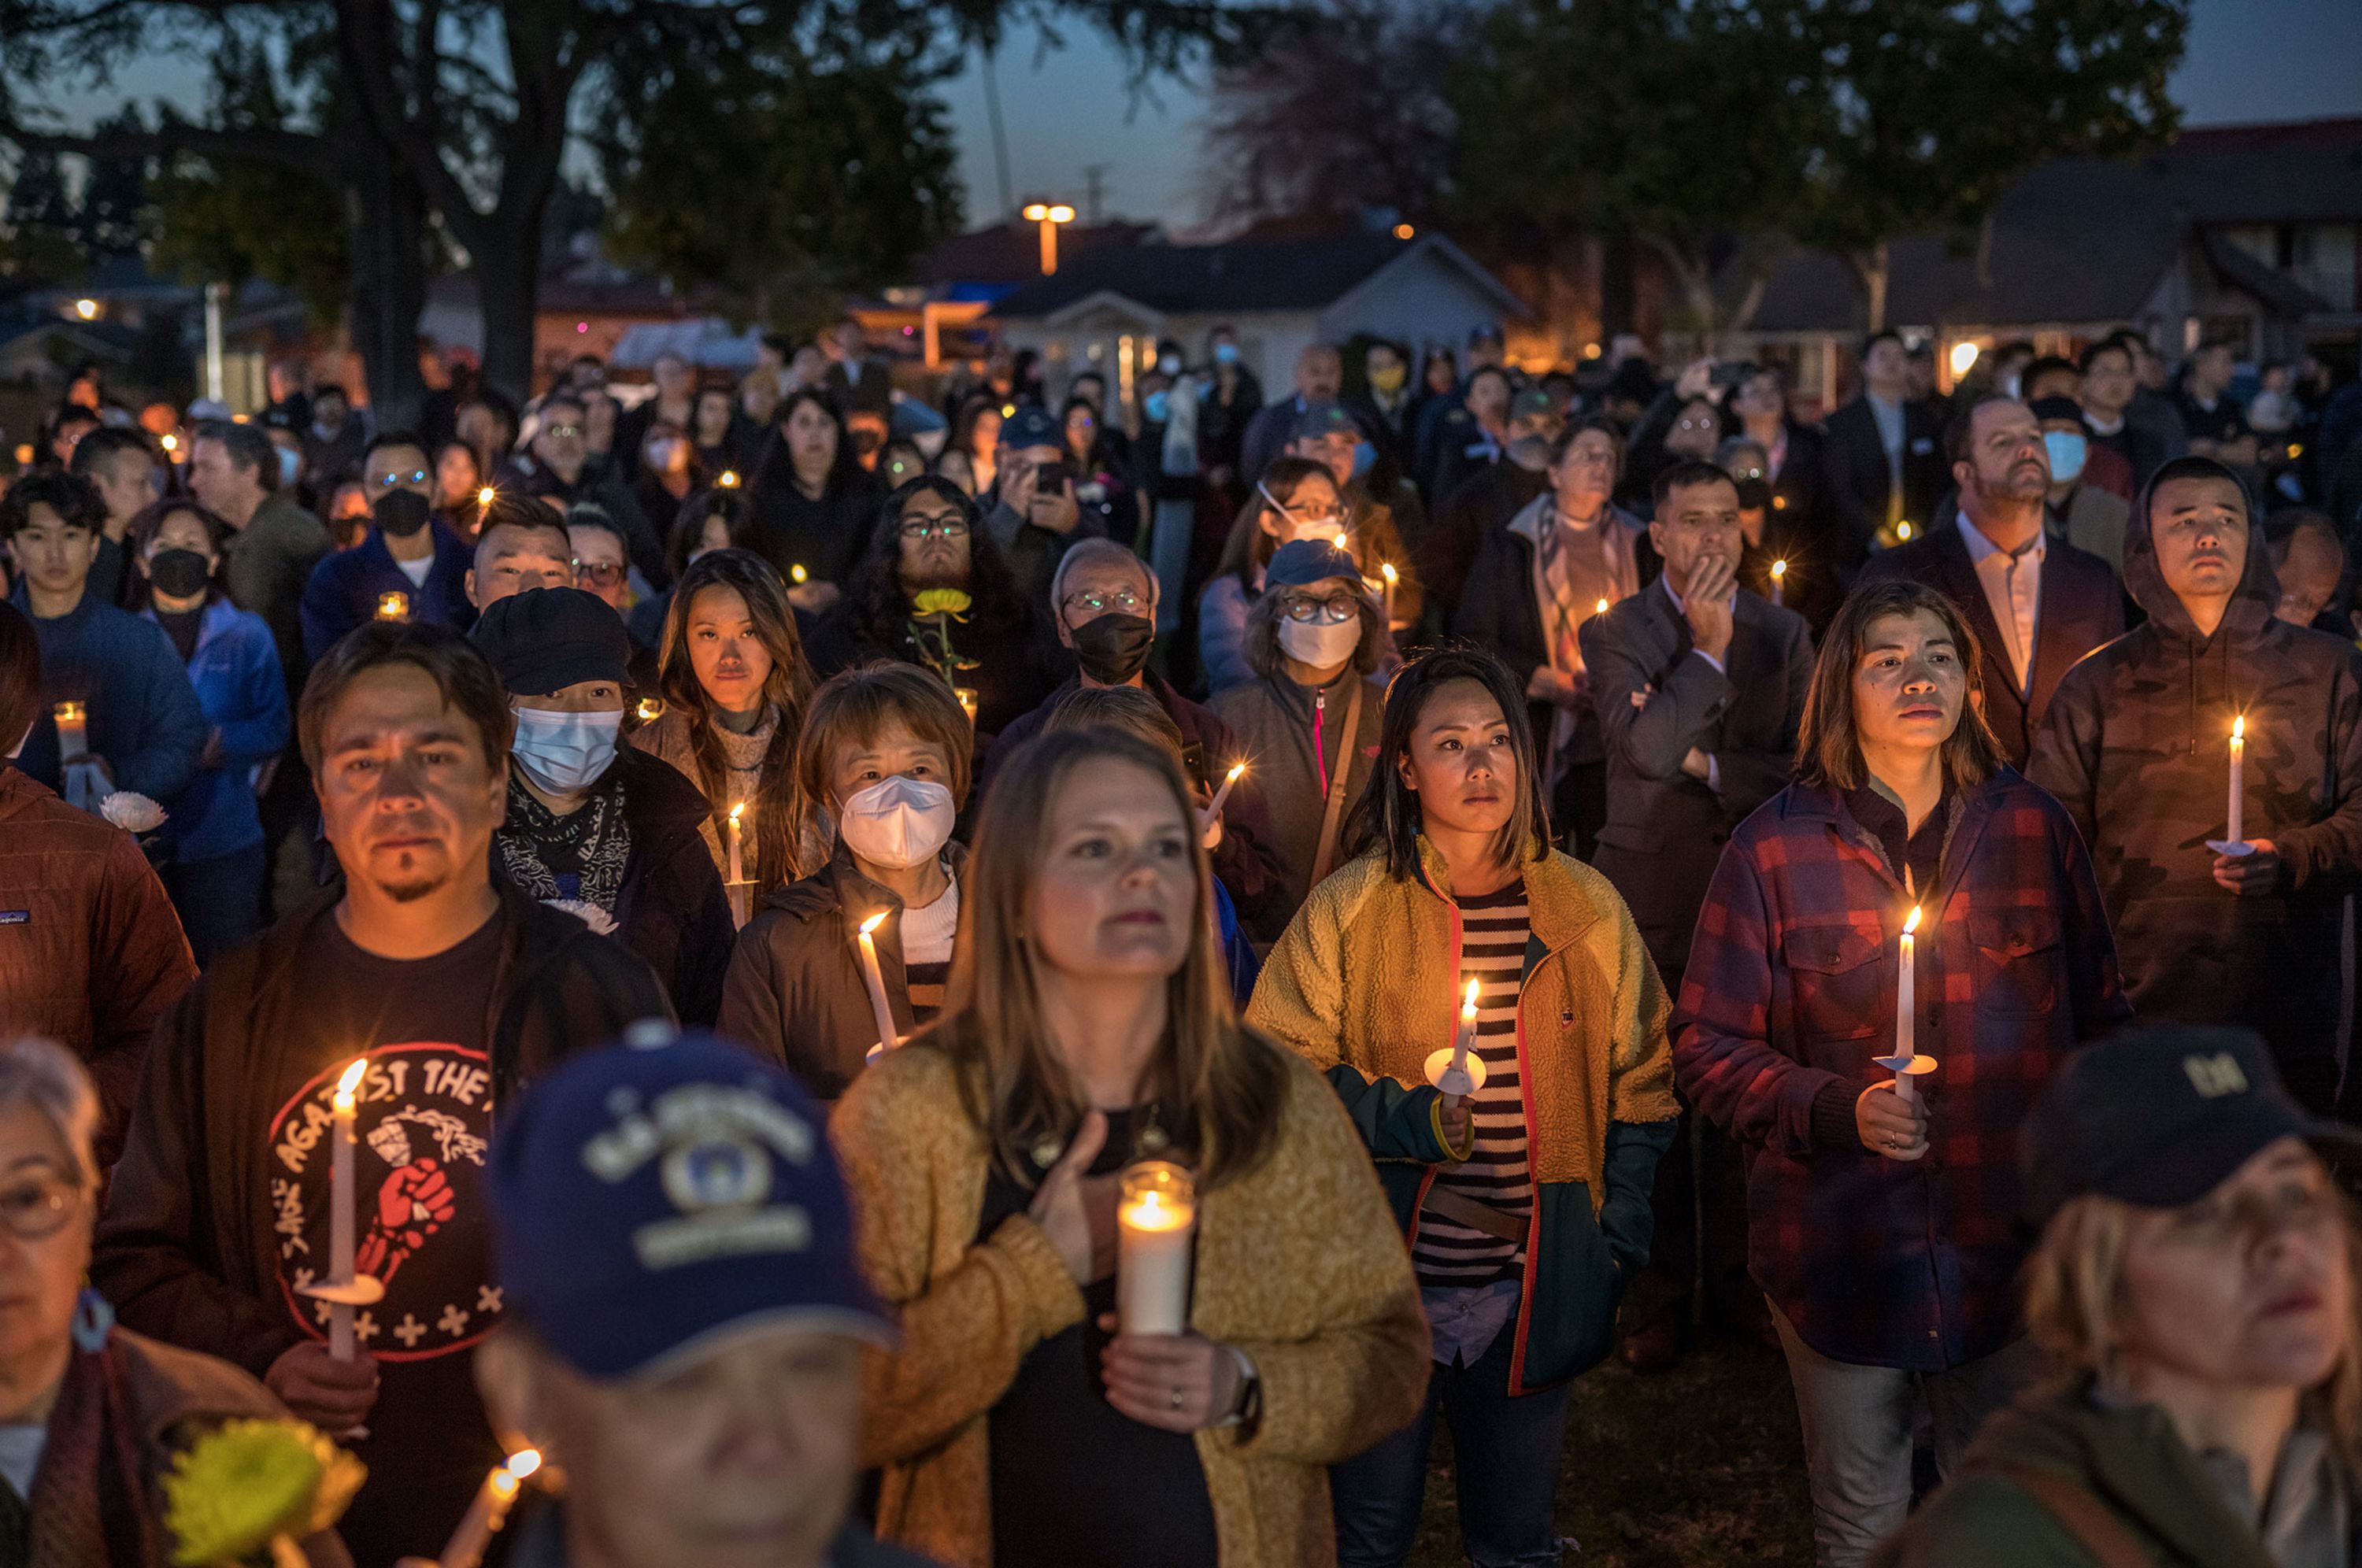 People gather at the Monterey Park City Hall for a candlelight vigil on Tuesday, January 24. They were remembering <a href="https://www.cnn.com/2023/01/24/us/monterey-park-shooting-victims-what-we-know/index.html" target="_blank">the victims</a> of Saturday's mass shooting in the California city.